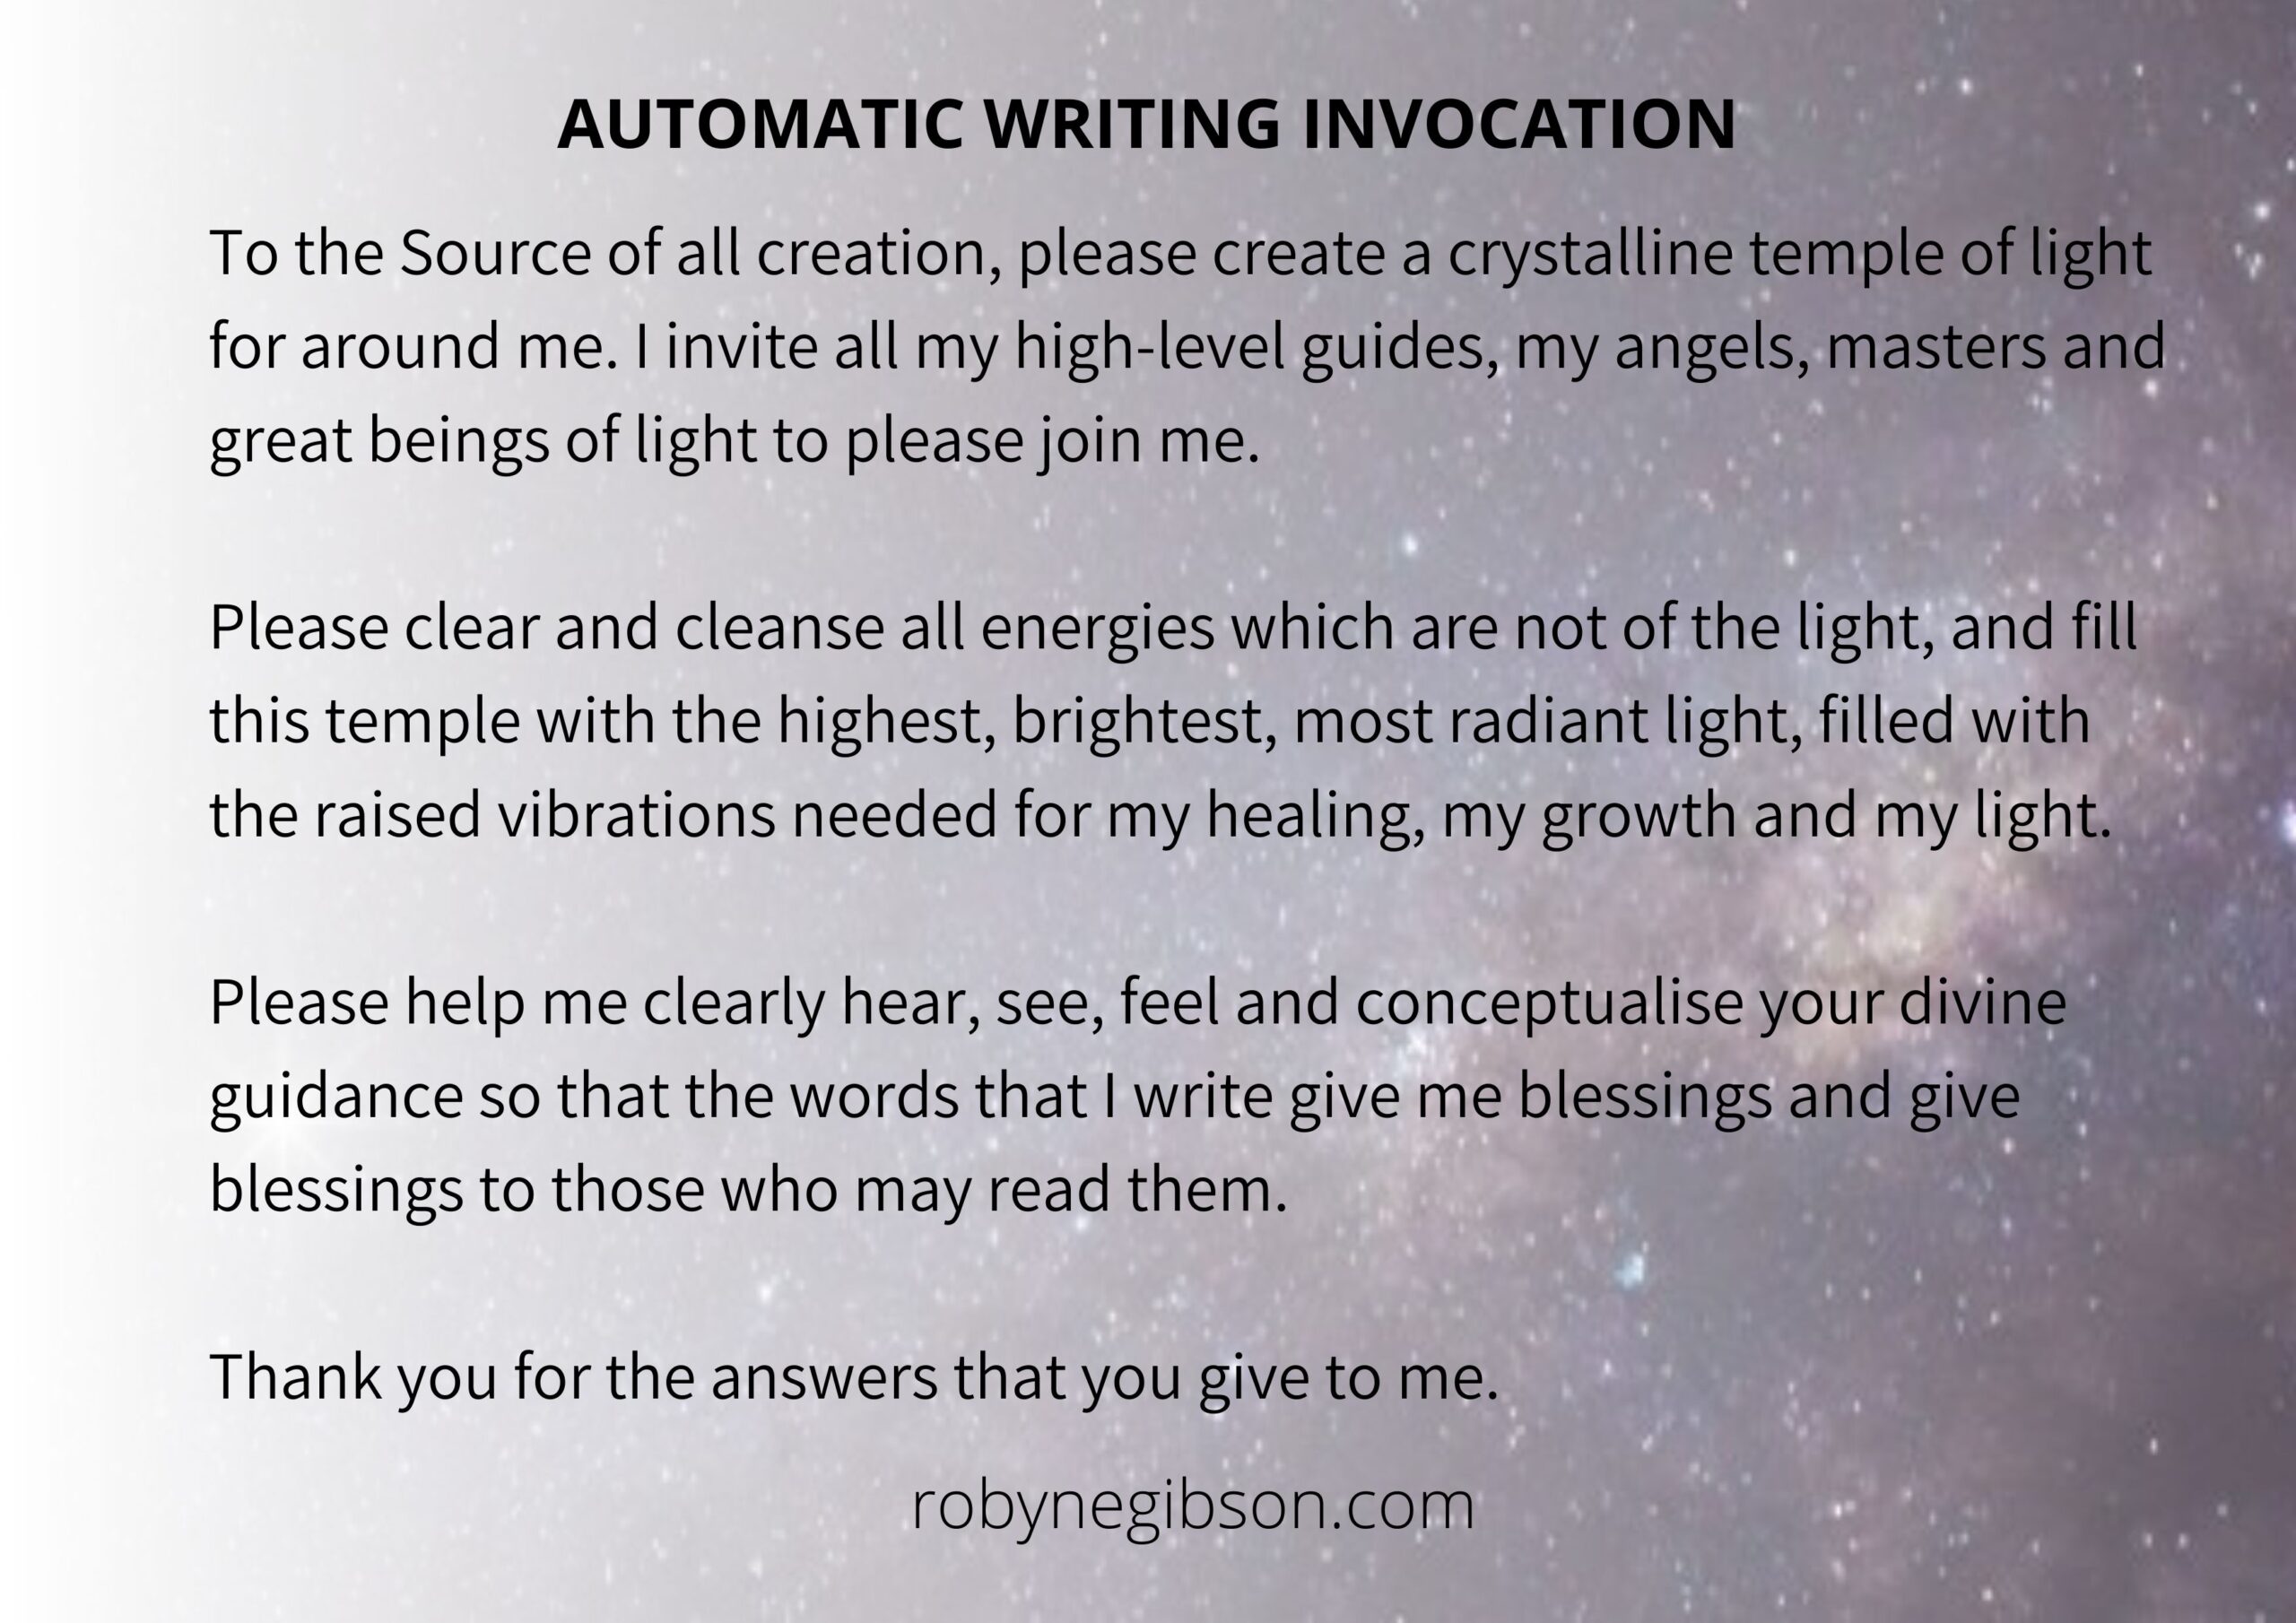 Invocation before Automatic Writing